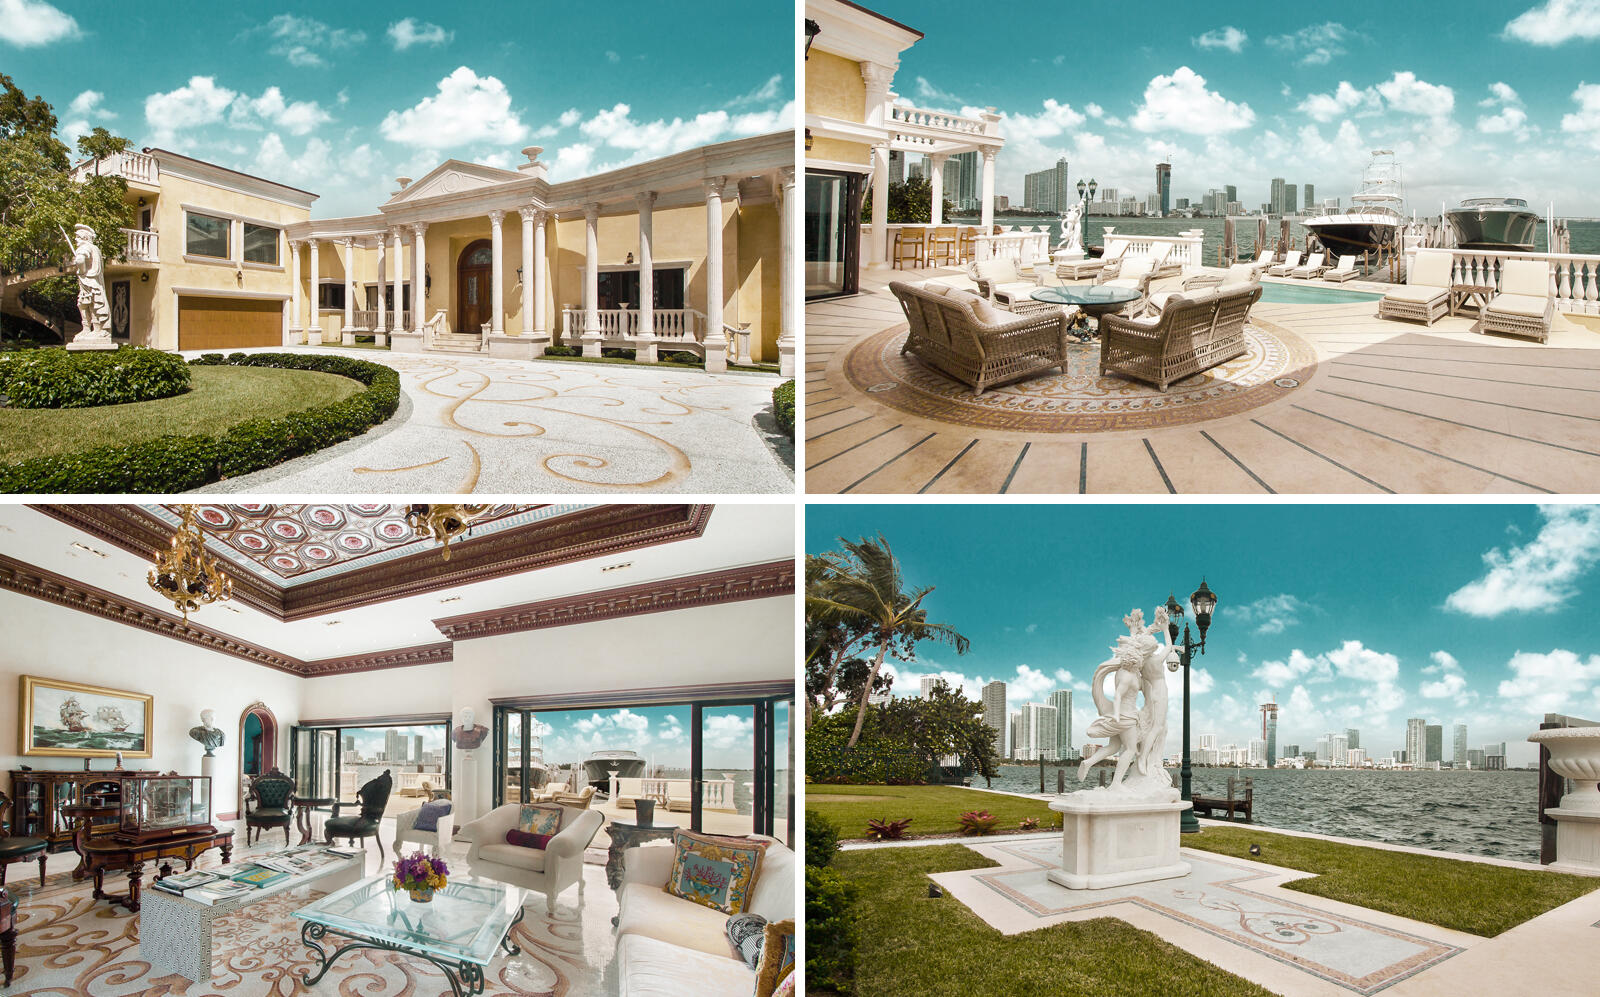 The Venetian Islands home (One Sotheby's International Realty)